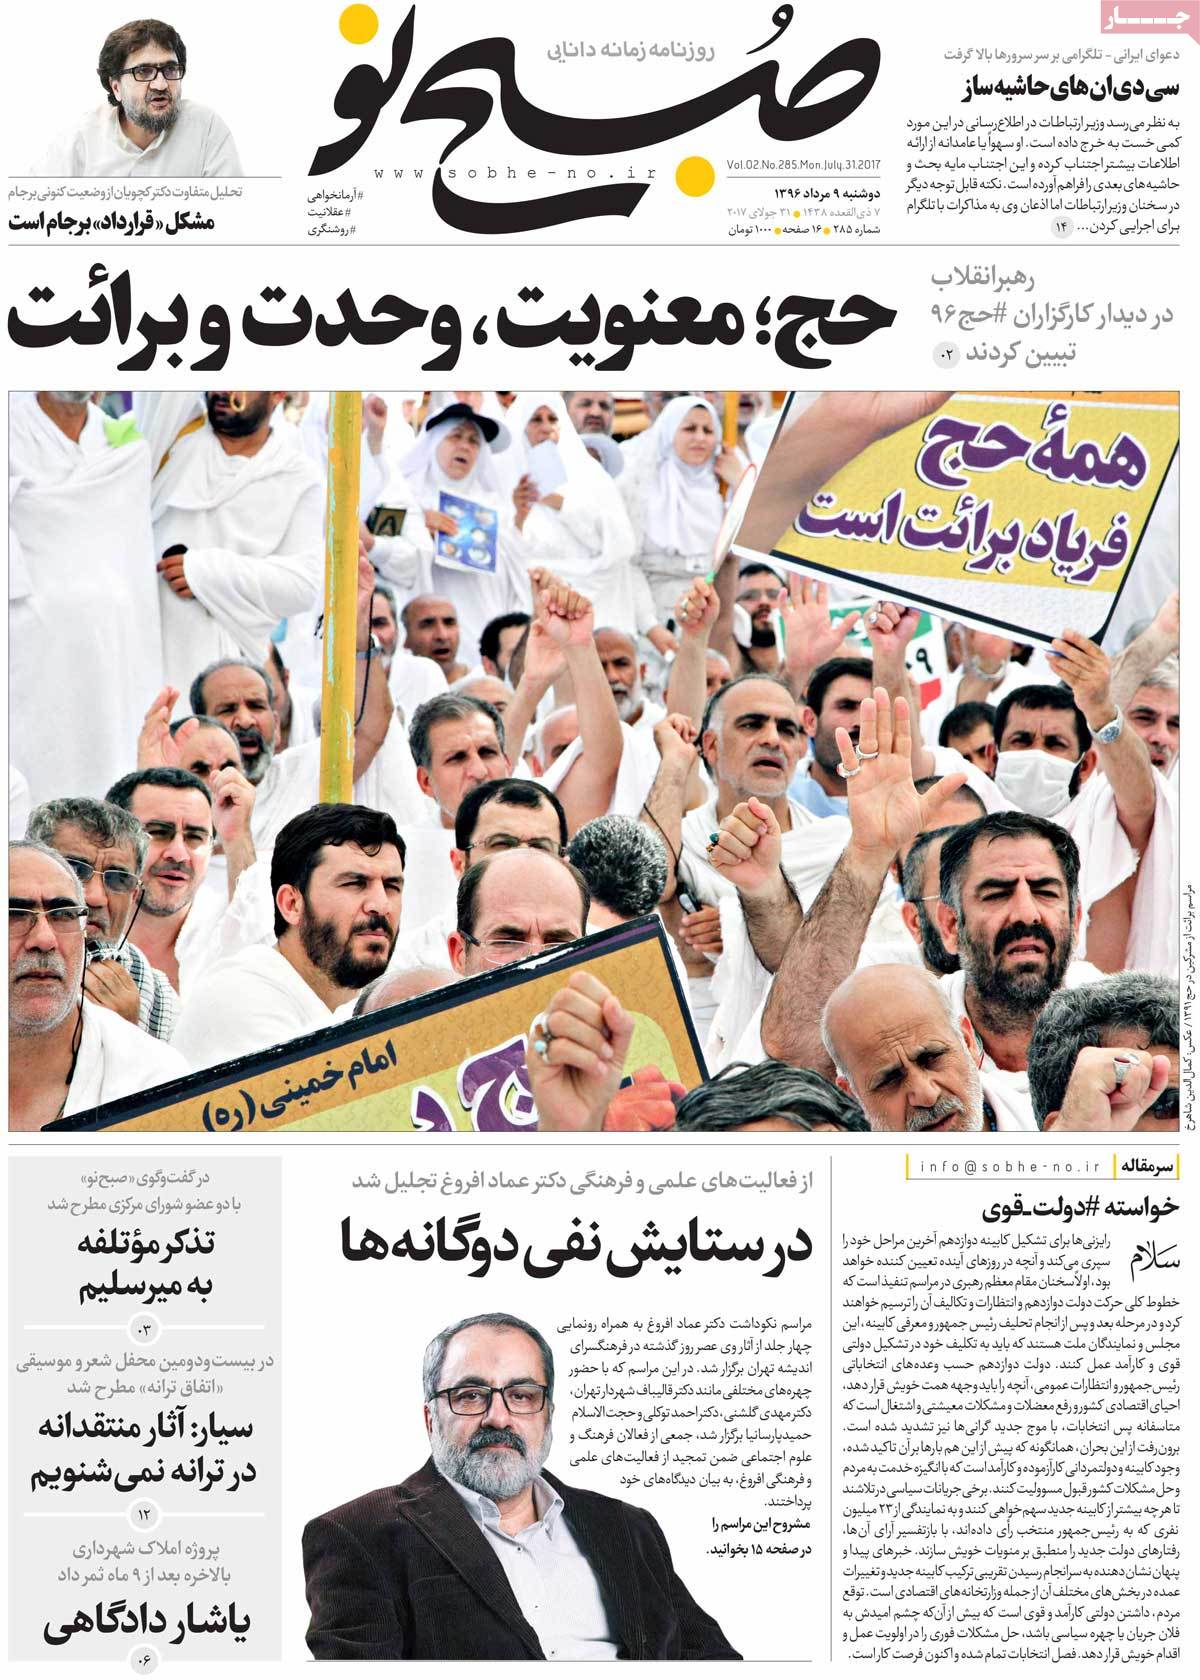 A Look at Iranian Newspaper Front Pages on July 31 - sobheno 